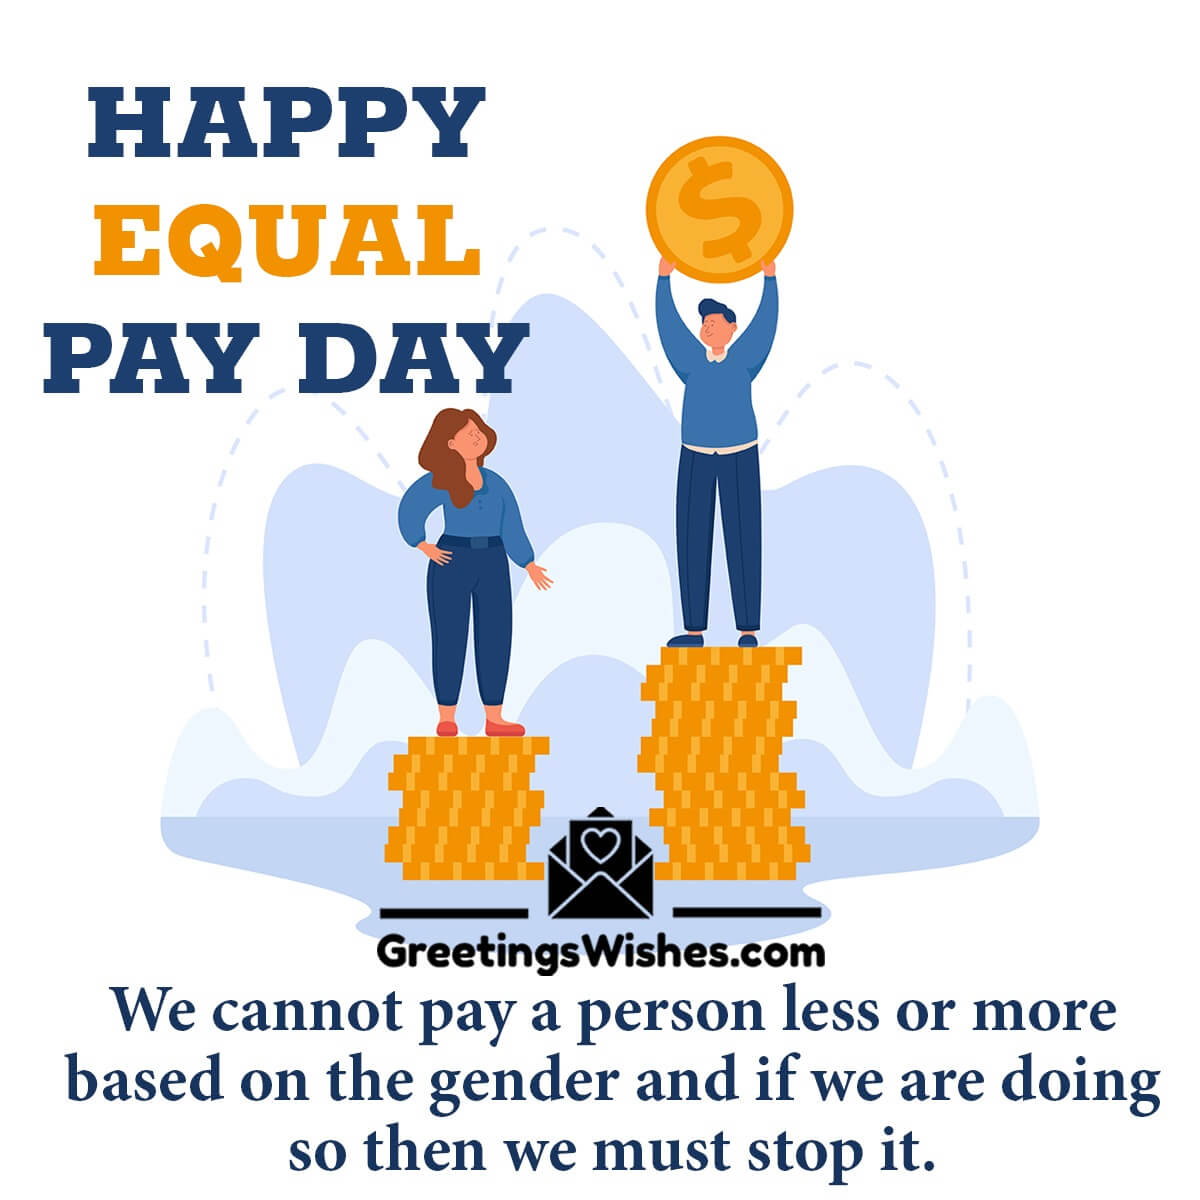 Happy Equal Pay Day Message